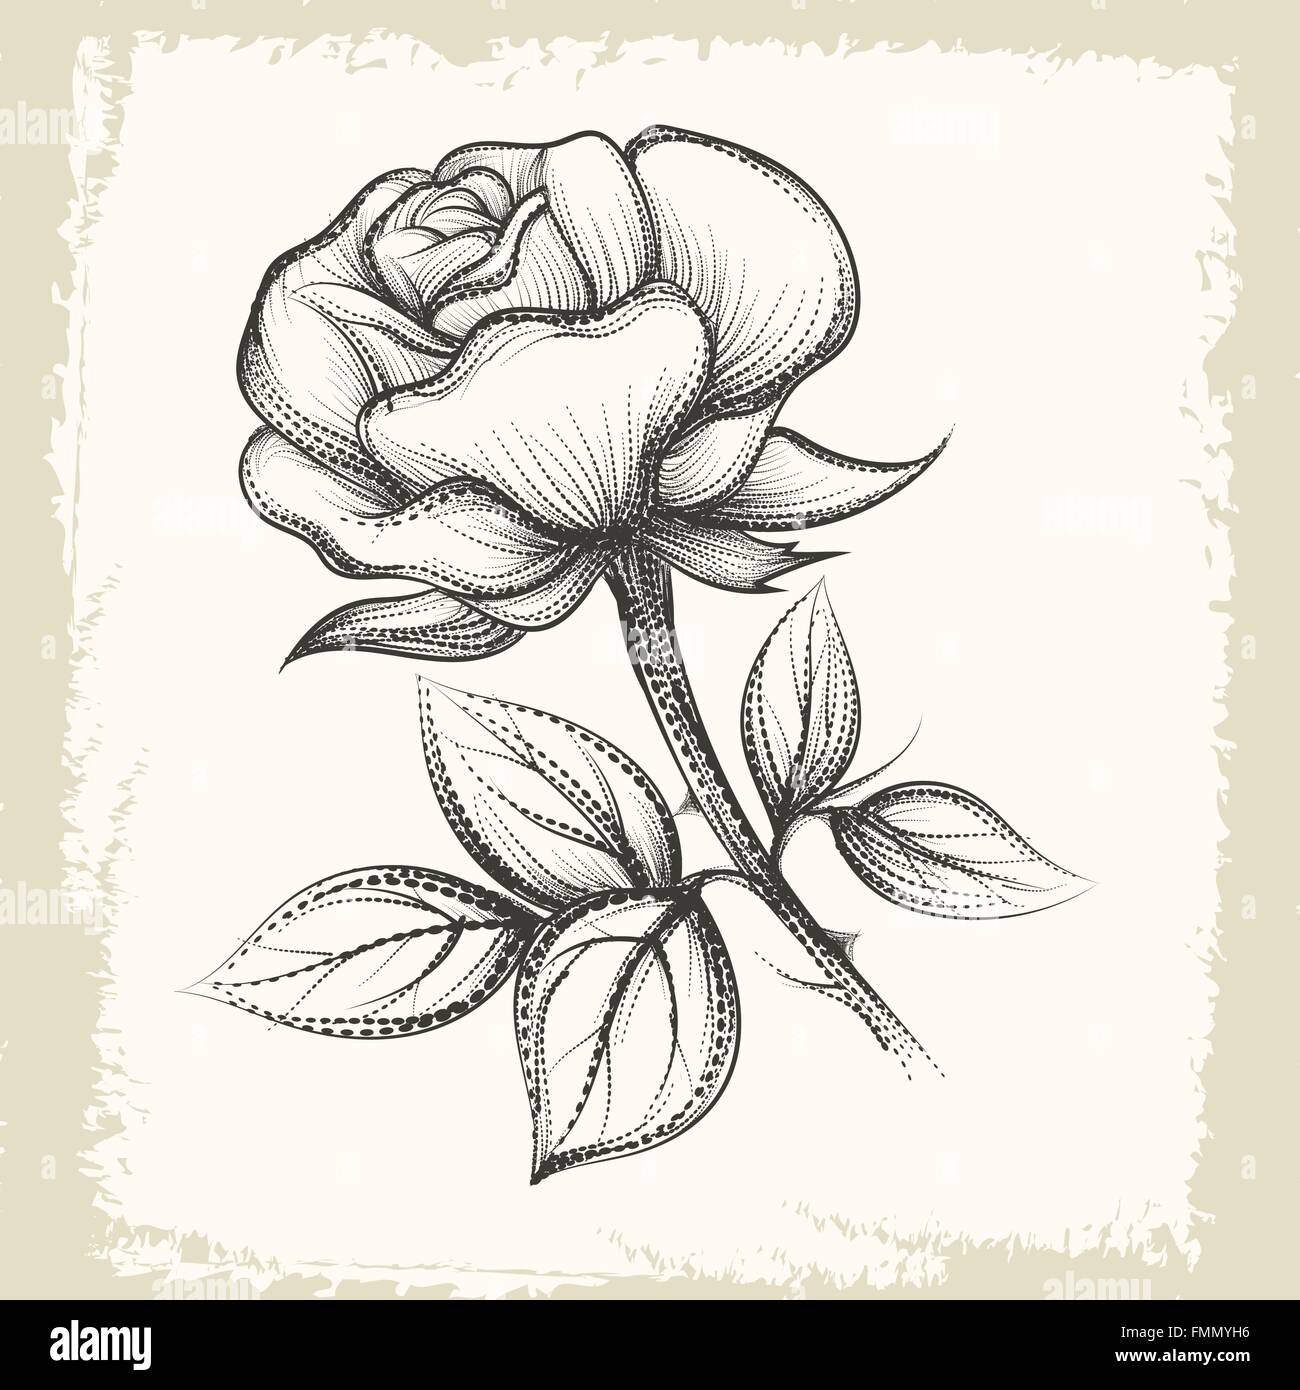 How To Draw A Rose – A Step-by-Step Tutorial – Artlex